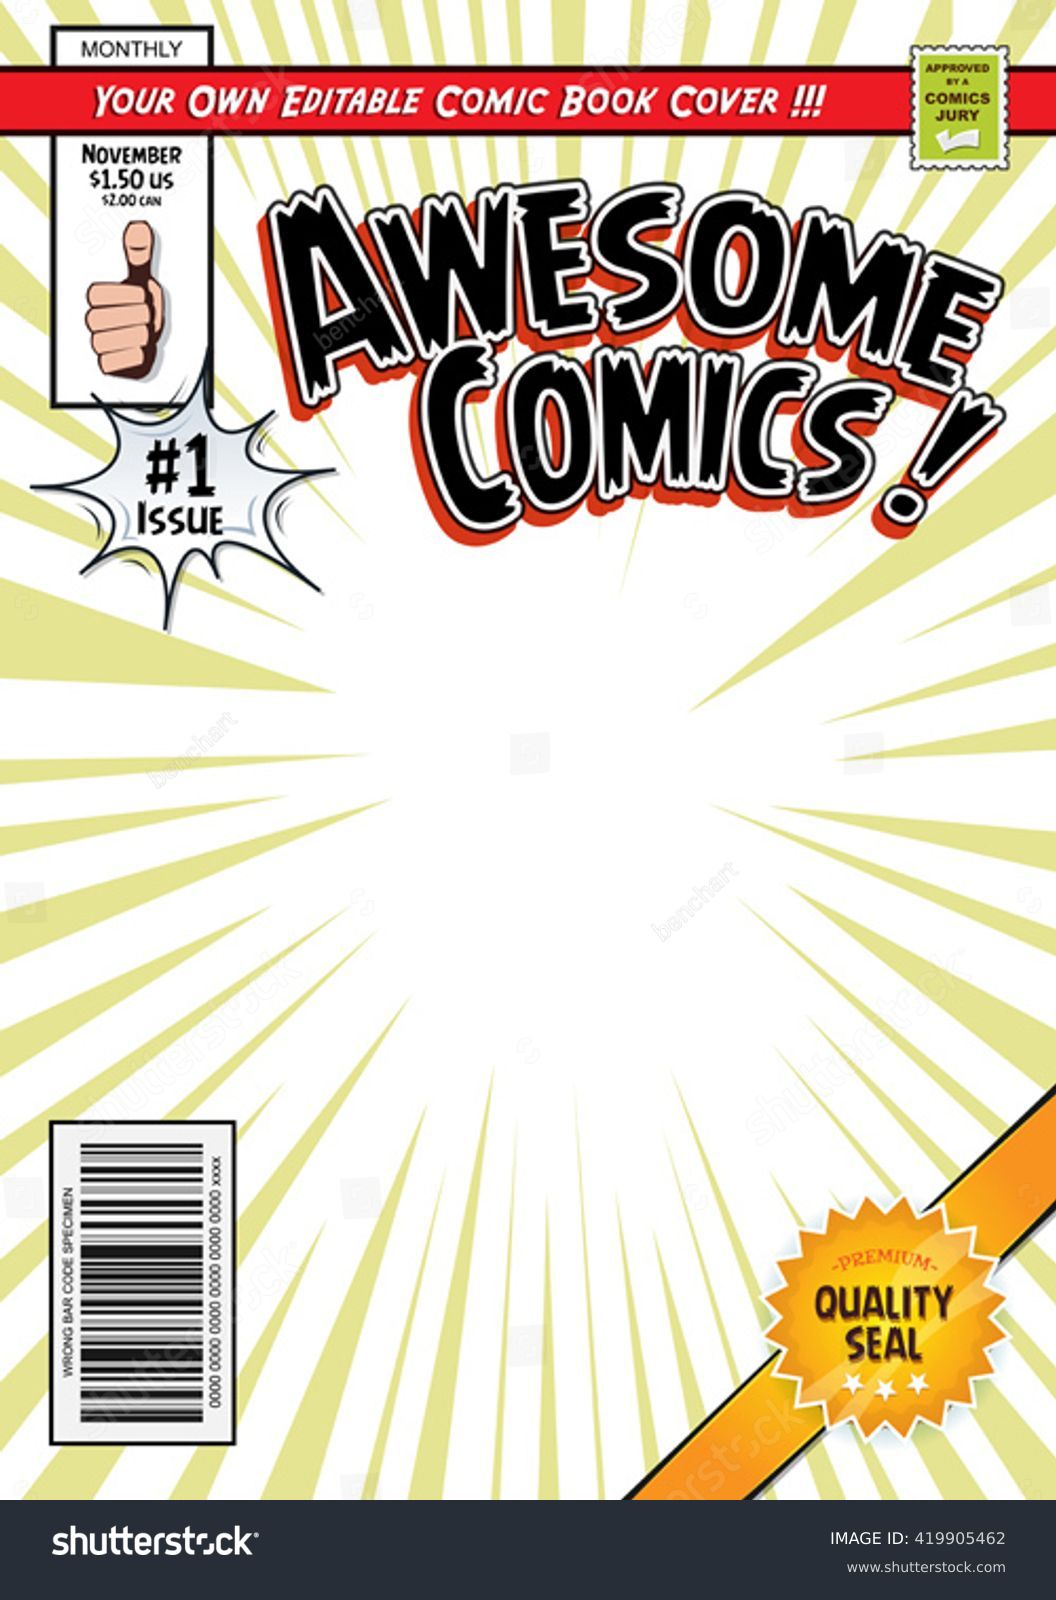 Comic Book Cover Template Illustration Cartoon Stock Vector Royalty Free 419905462